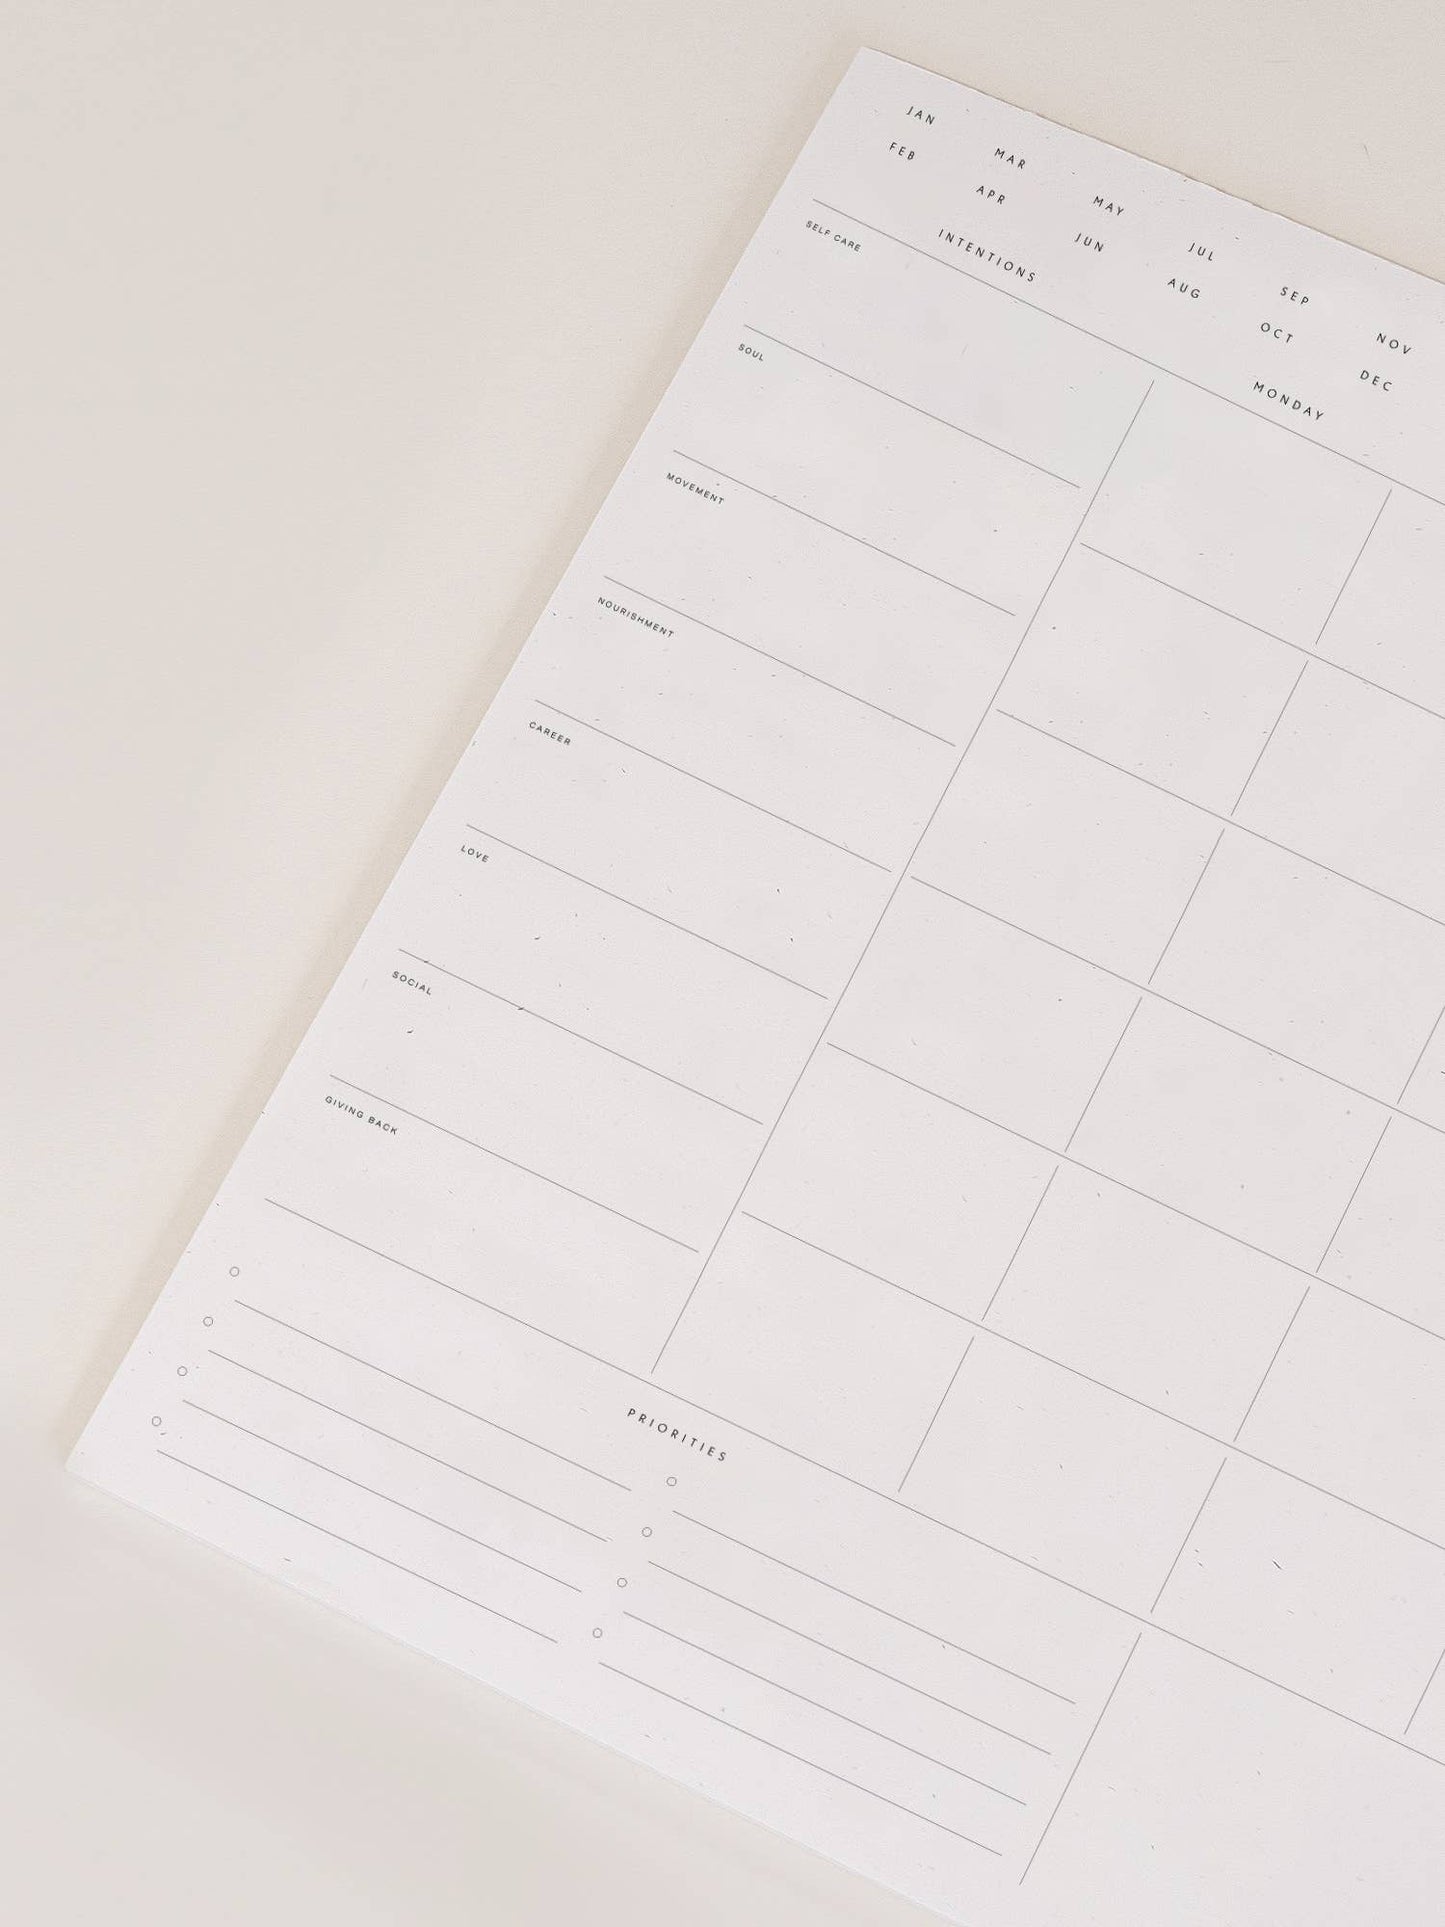 A minimal pad from Wilde House Paper; Introducing the new & improved minimal desk accessory to organize your month & be your best self. Made with recycled paper.